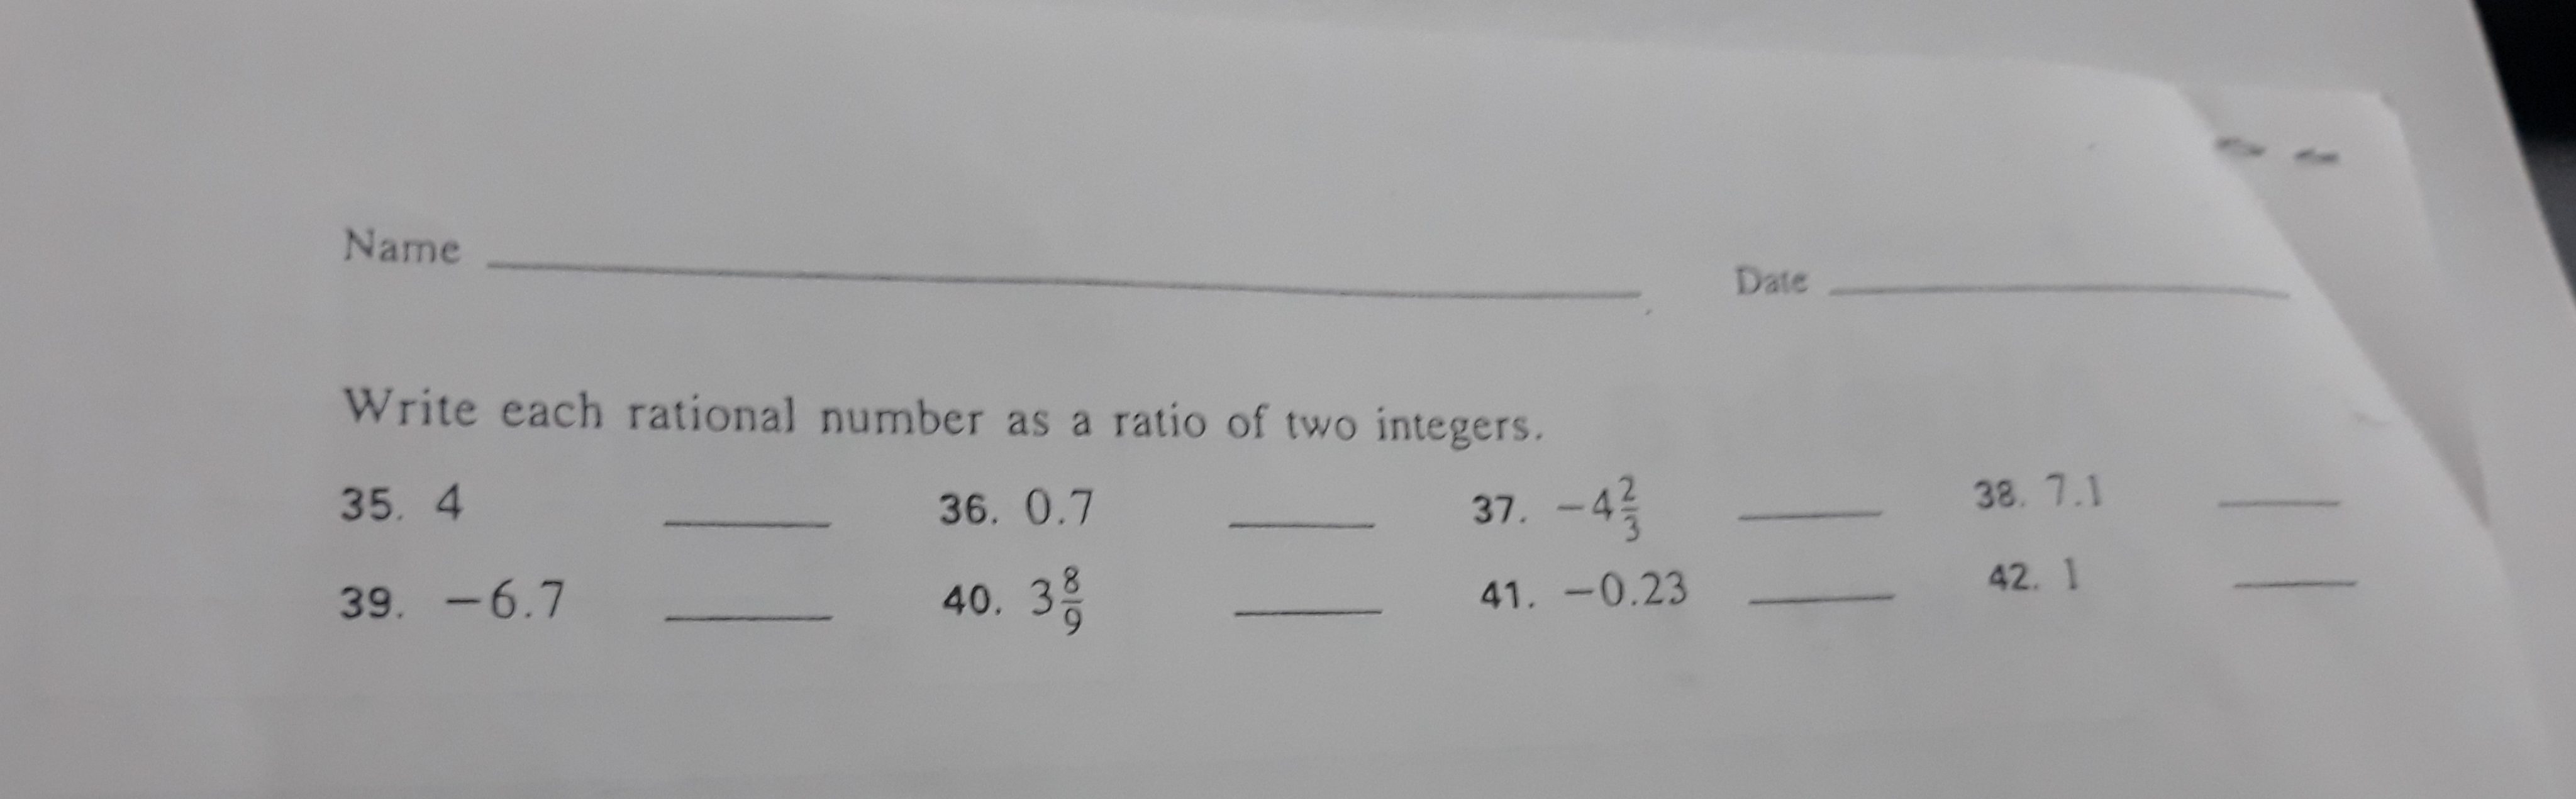 Write each rational number as a ratio of two integers.
35. 4
36. 0.7
37.
